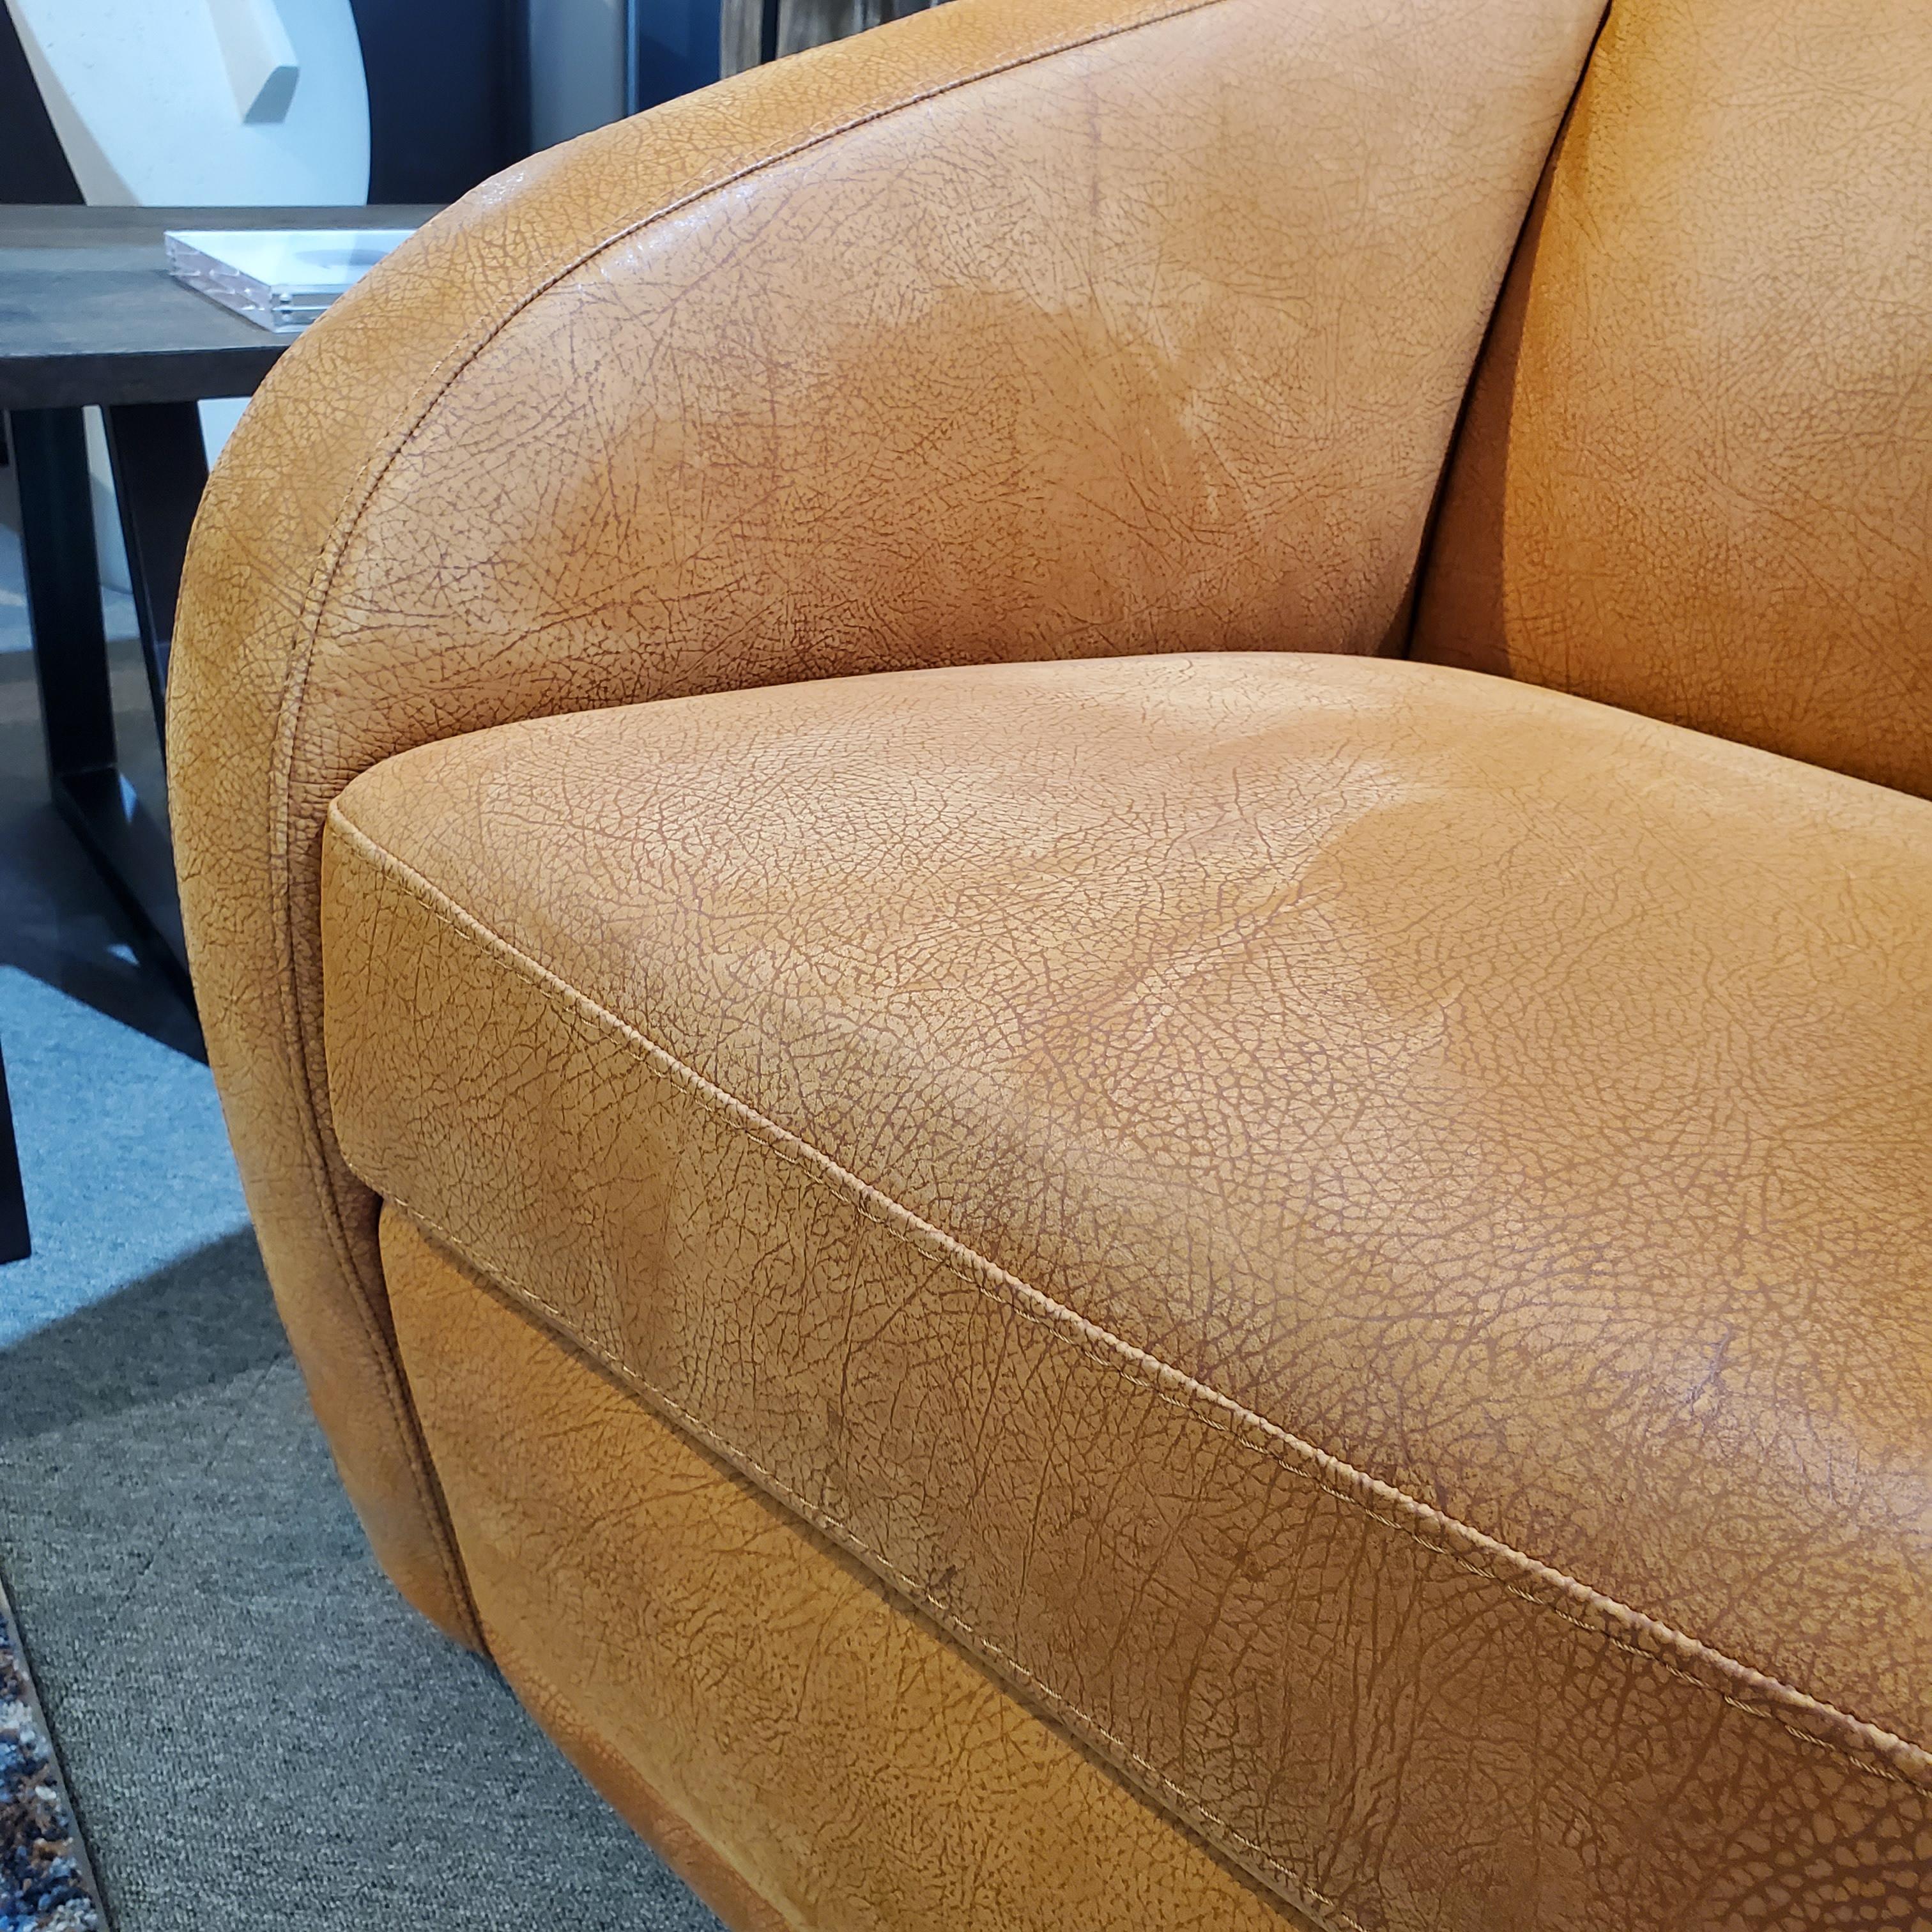 Easy Swivel Chair Close Up of Leather and Stitching Details